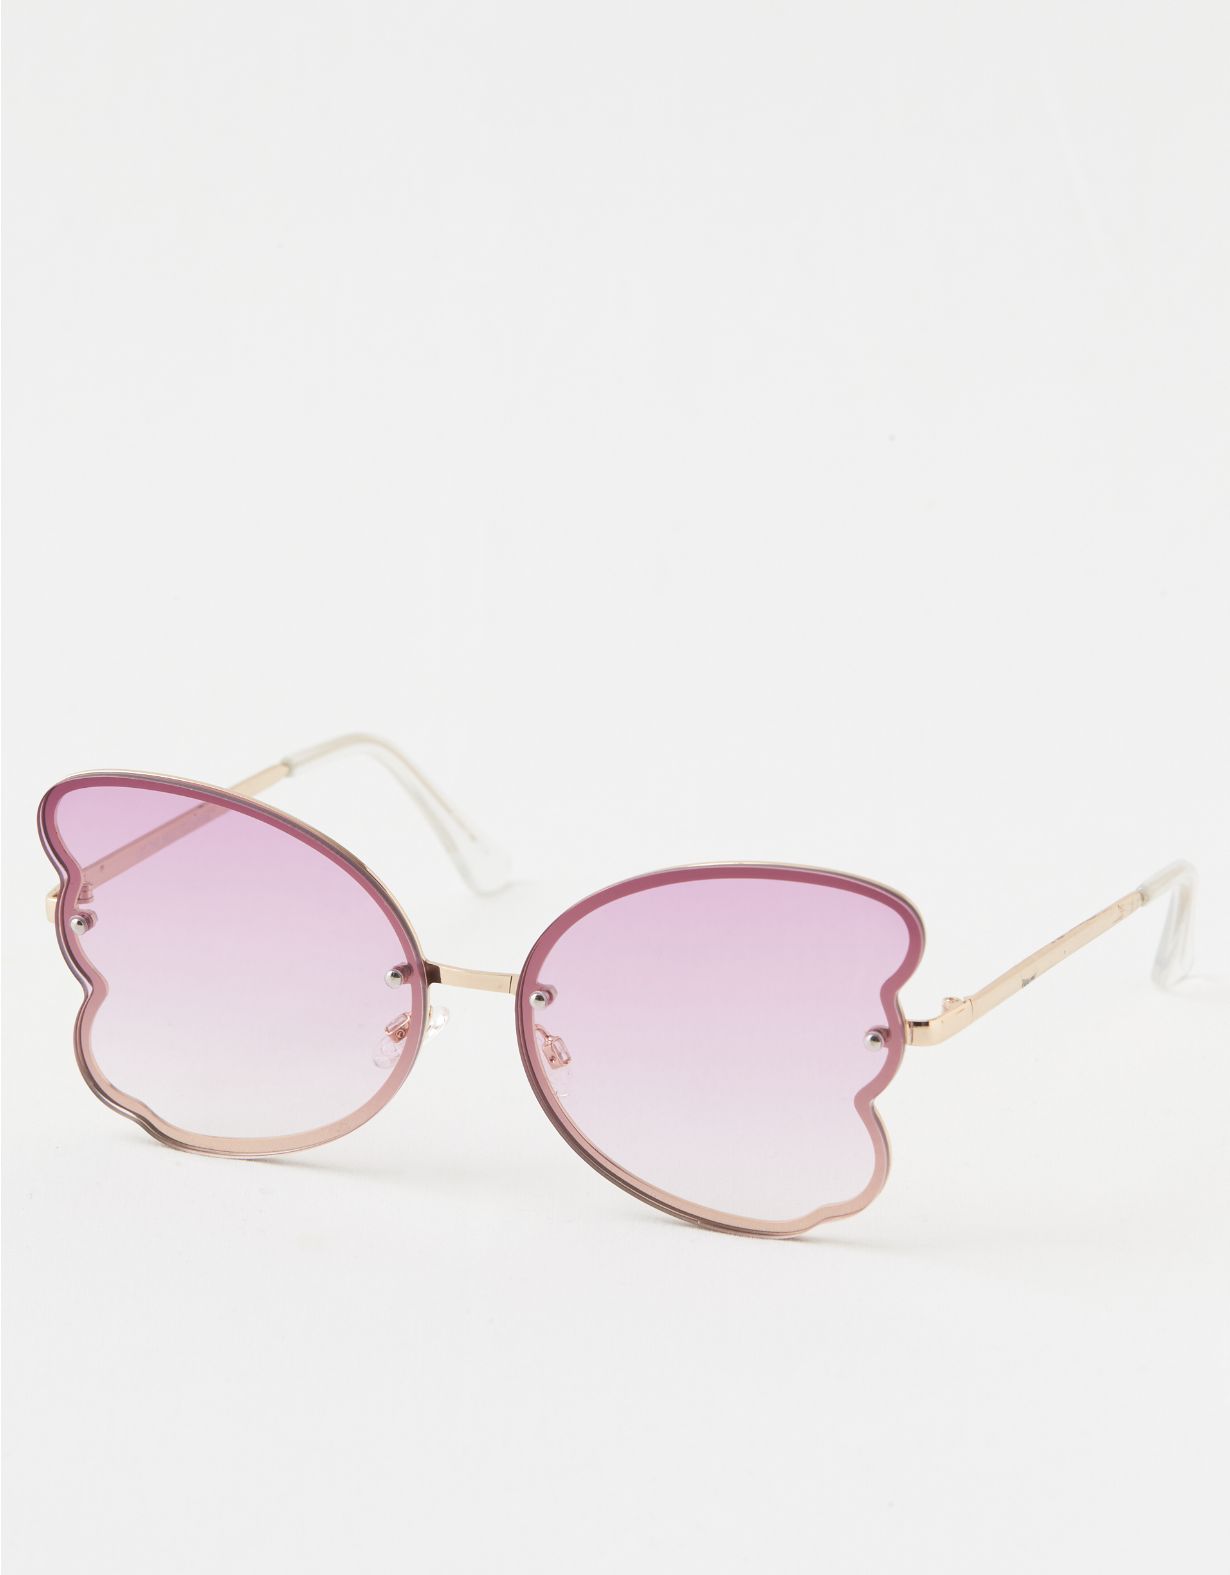 Aerie Butterfly Sunglasses